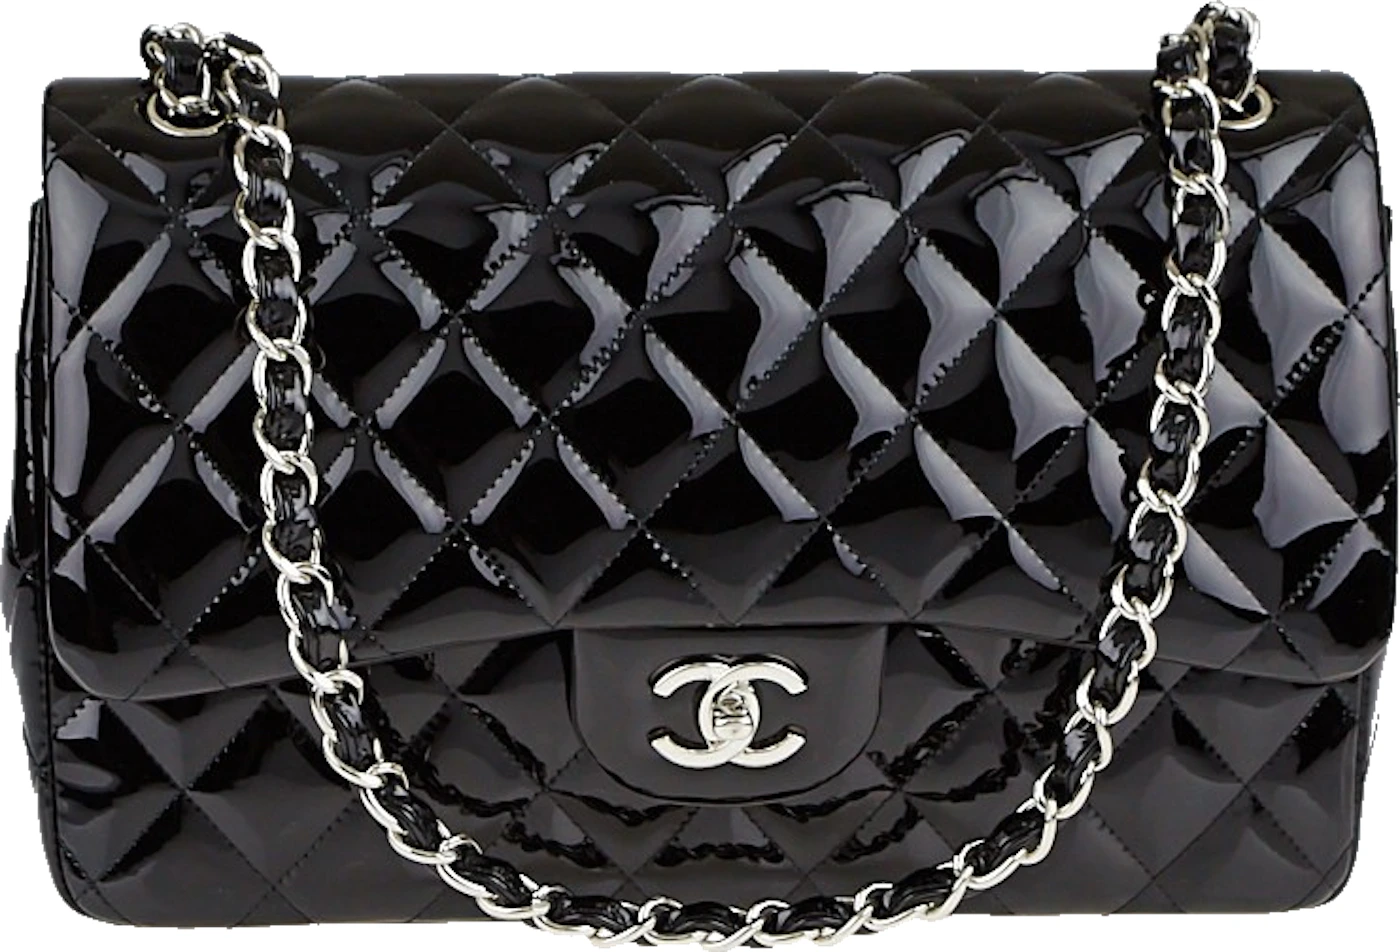 Chanel Timeless Maxi Patent Leather Beige